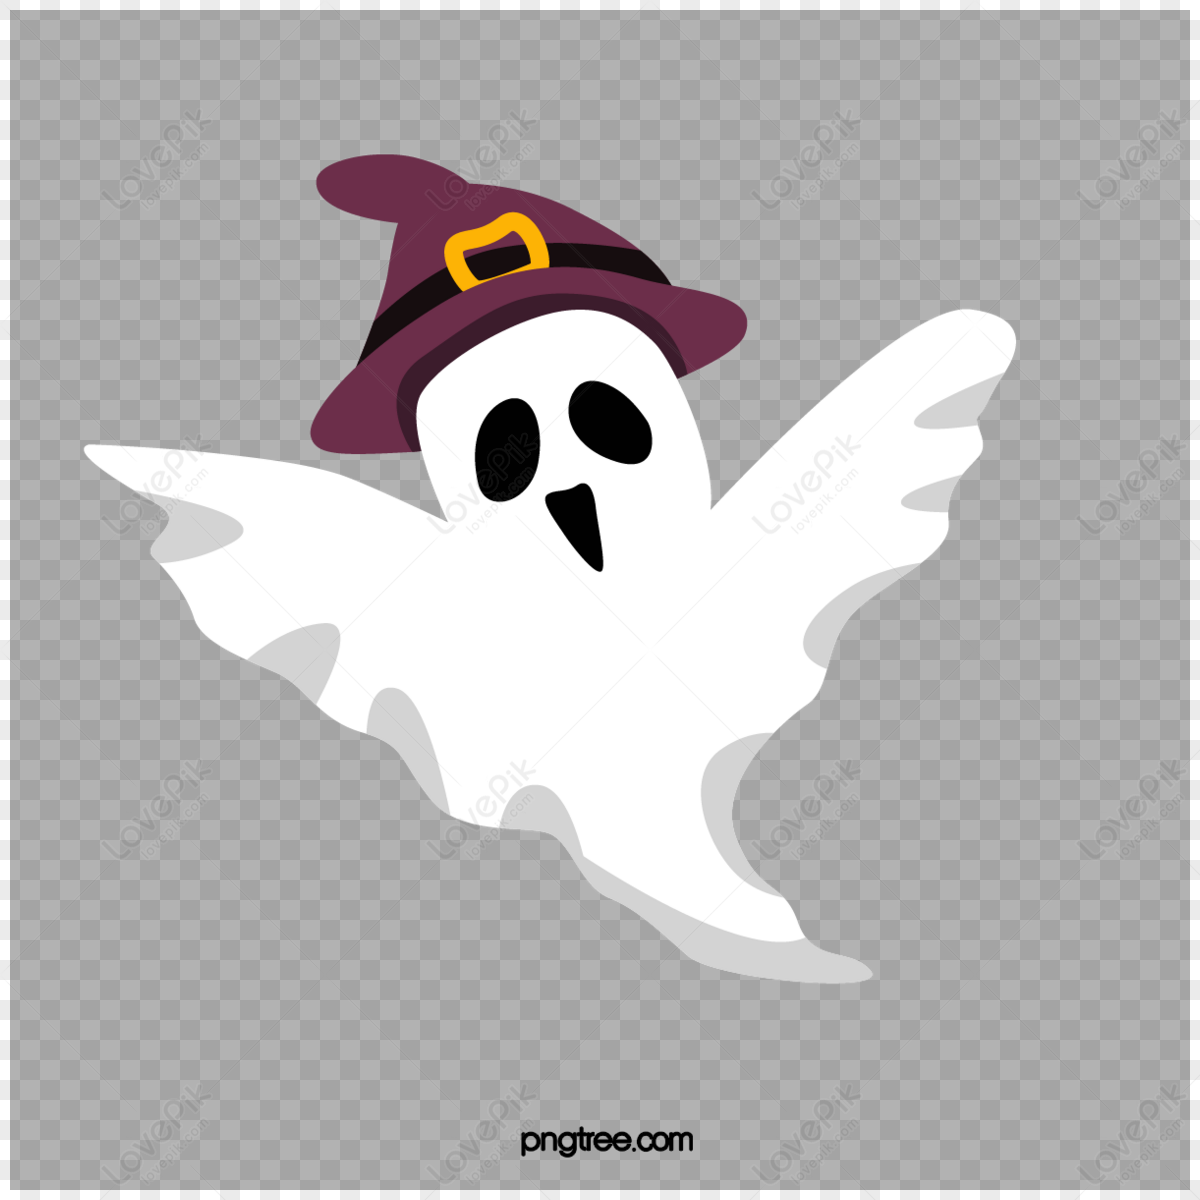 Halloween white ghost on a transparent background. Ghost with abstract  shapes. Halloween white ghost party element PNG. Scary ghost image with a scary  face. 11016941 PNG